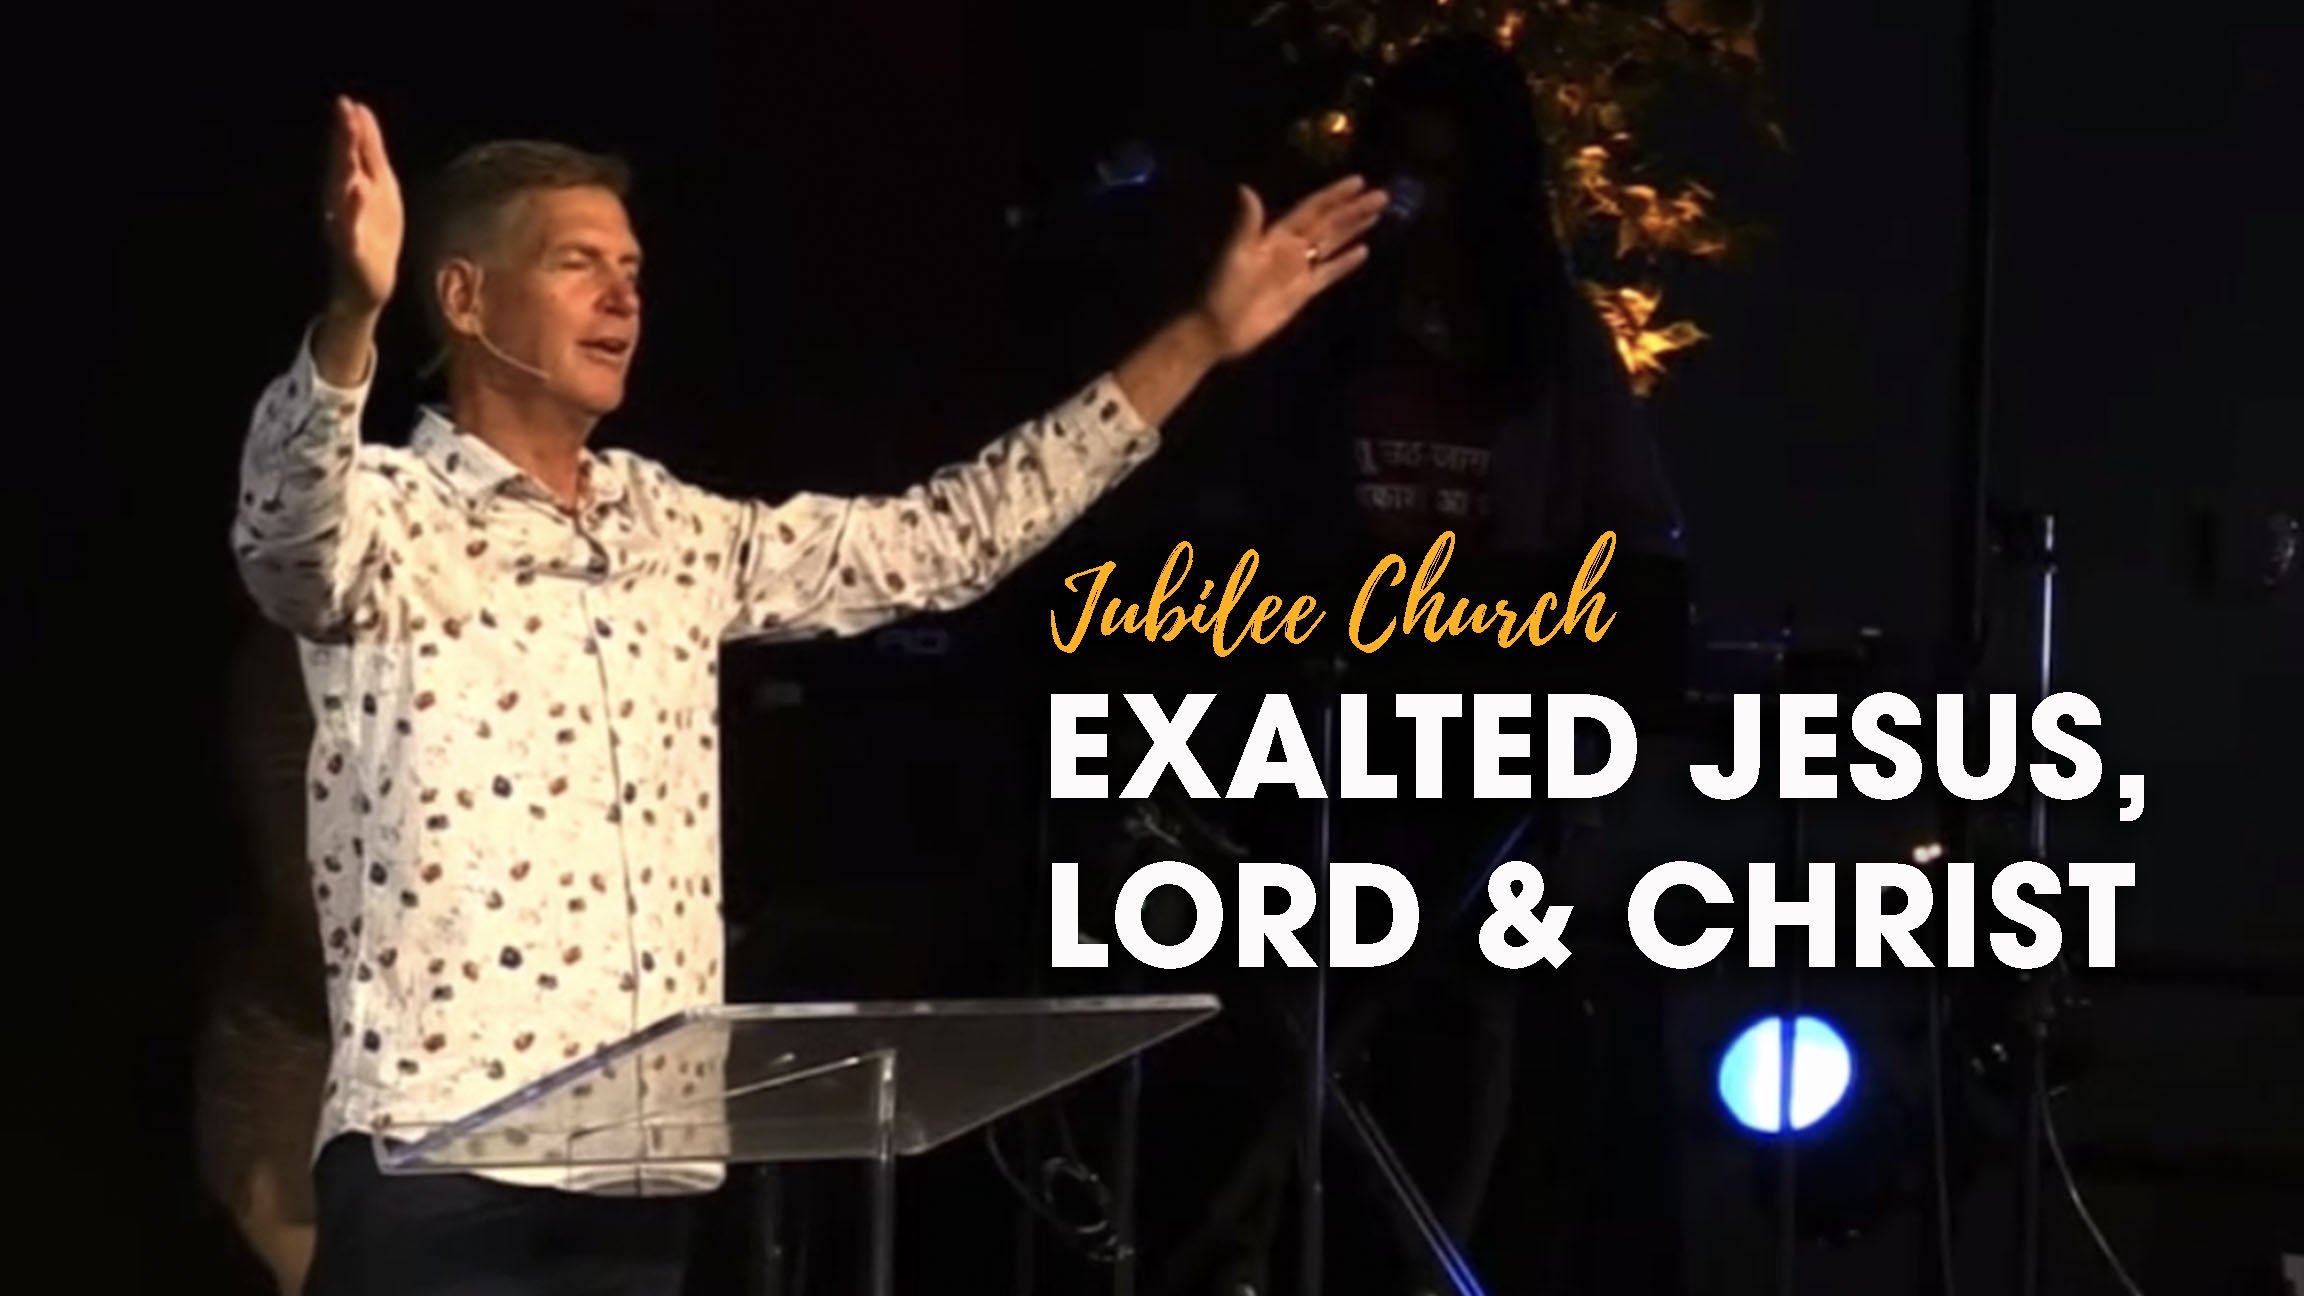 Exalted Jesus – Lord and Christ